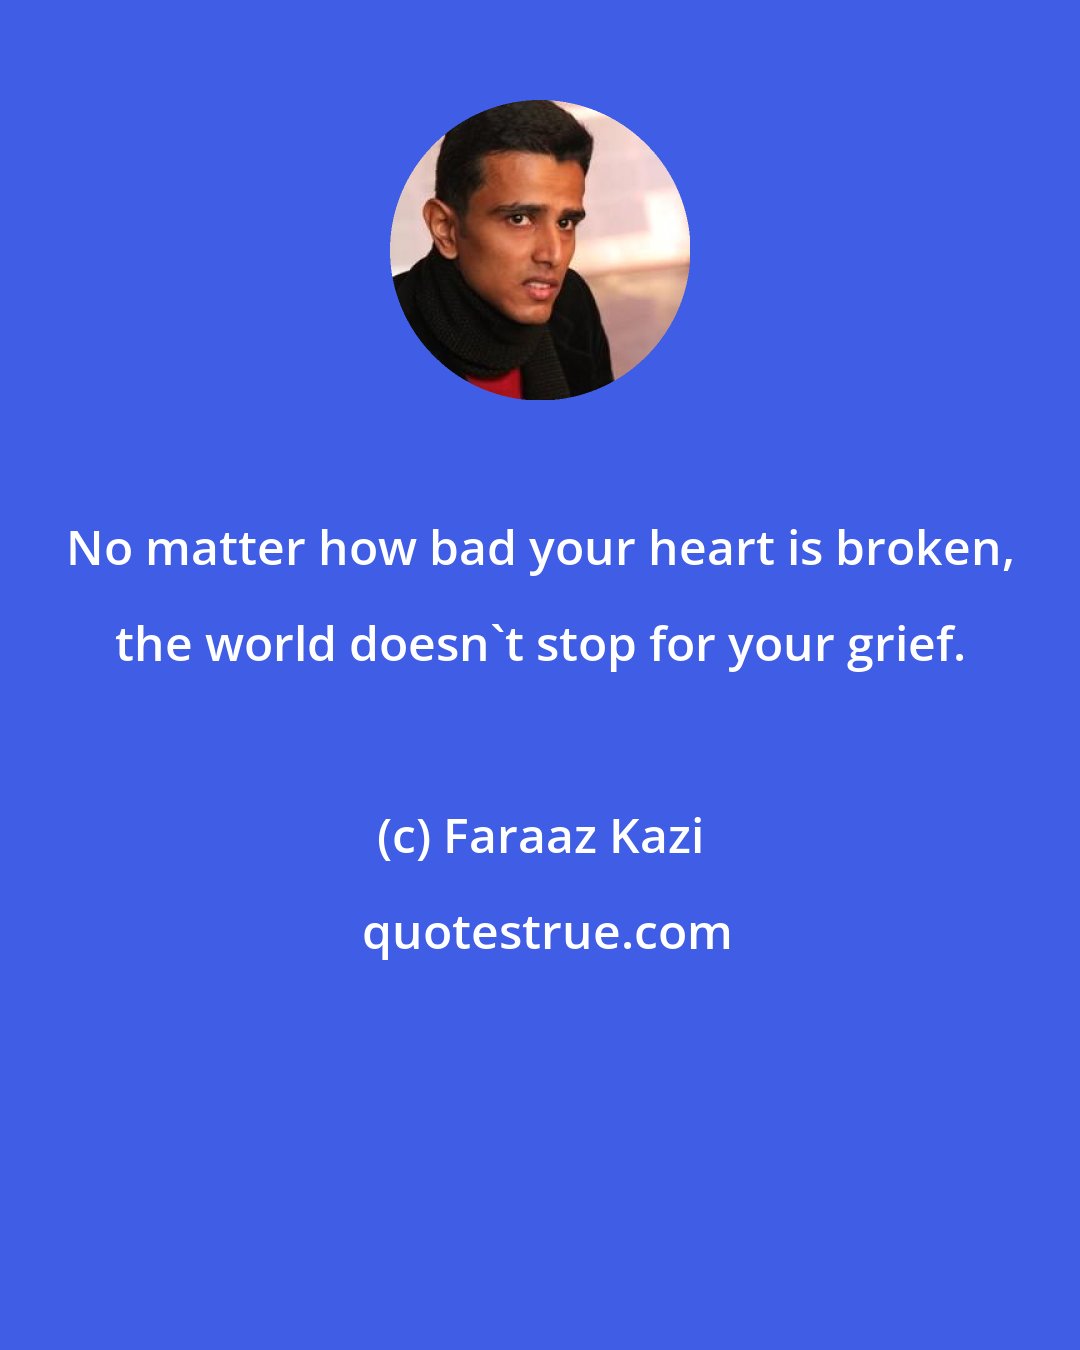 Faraaz Kazi: No matter how bad your heart is broken, the world doesn't stop for your grief.